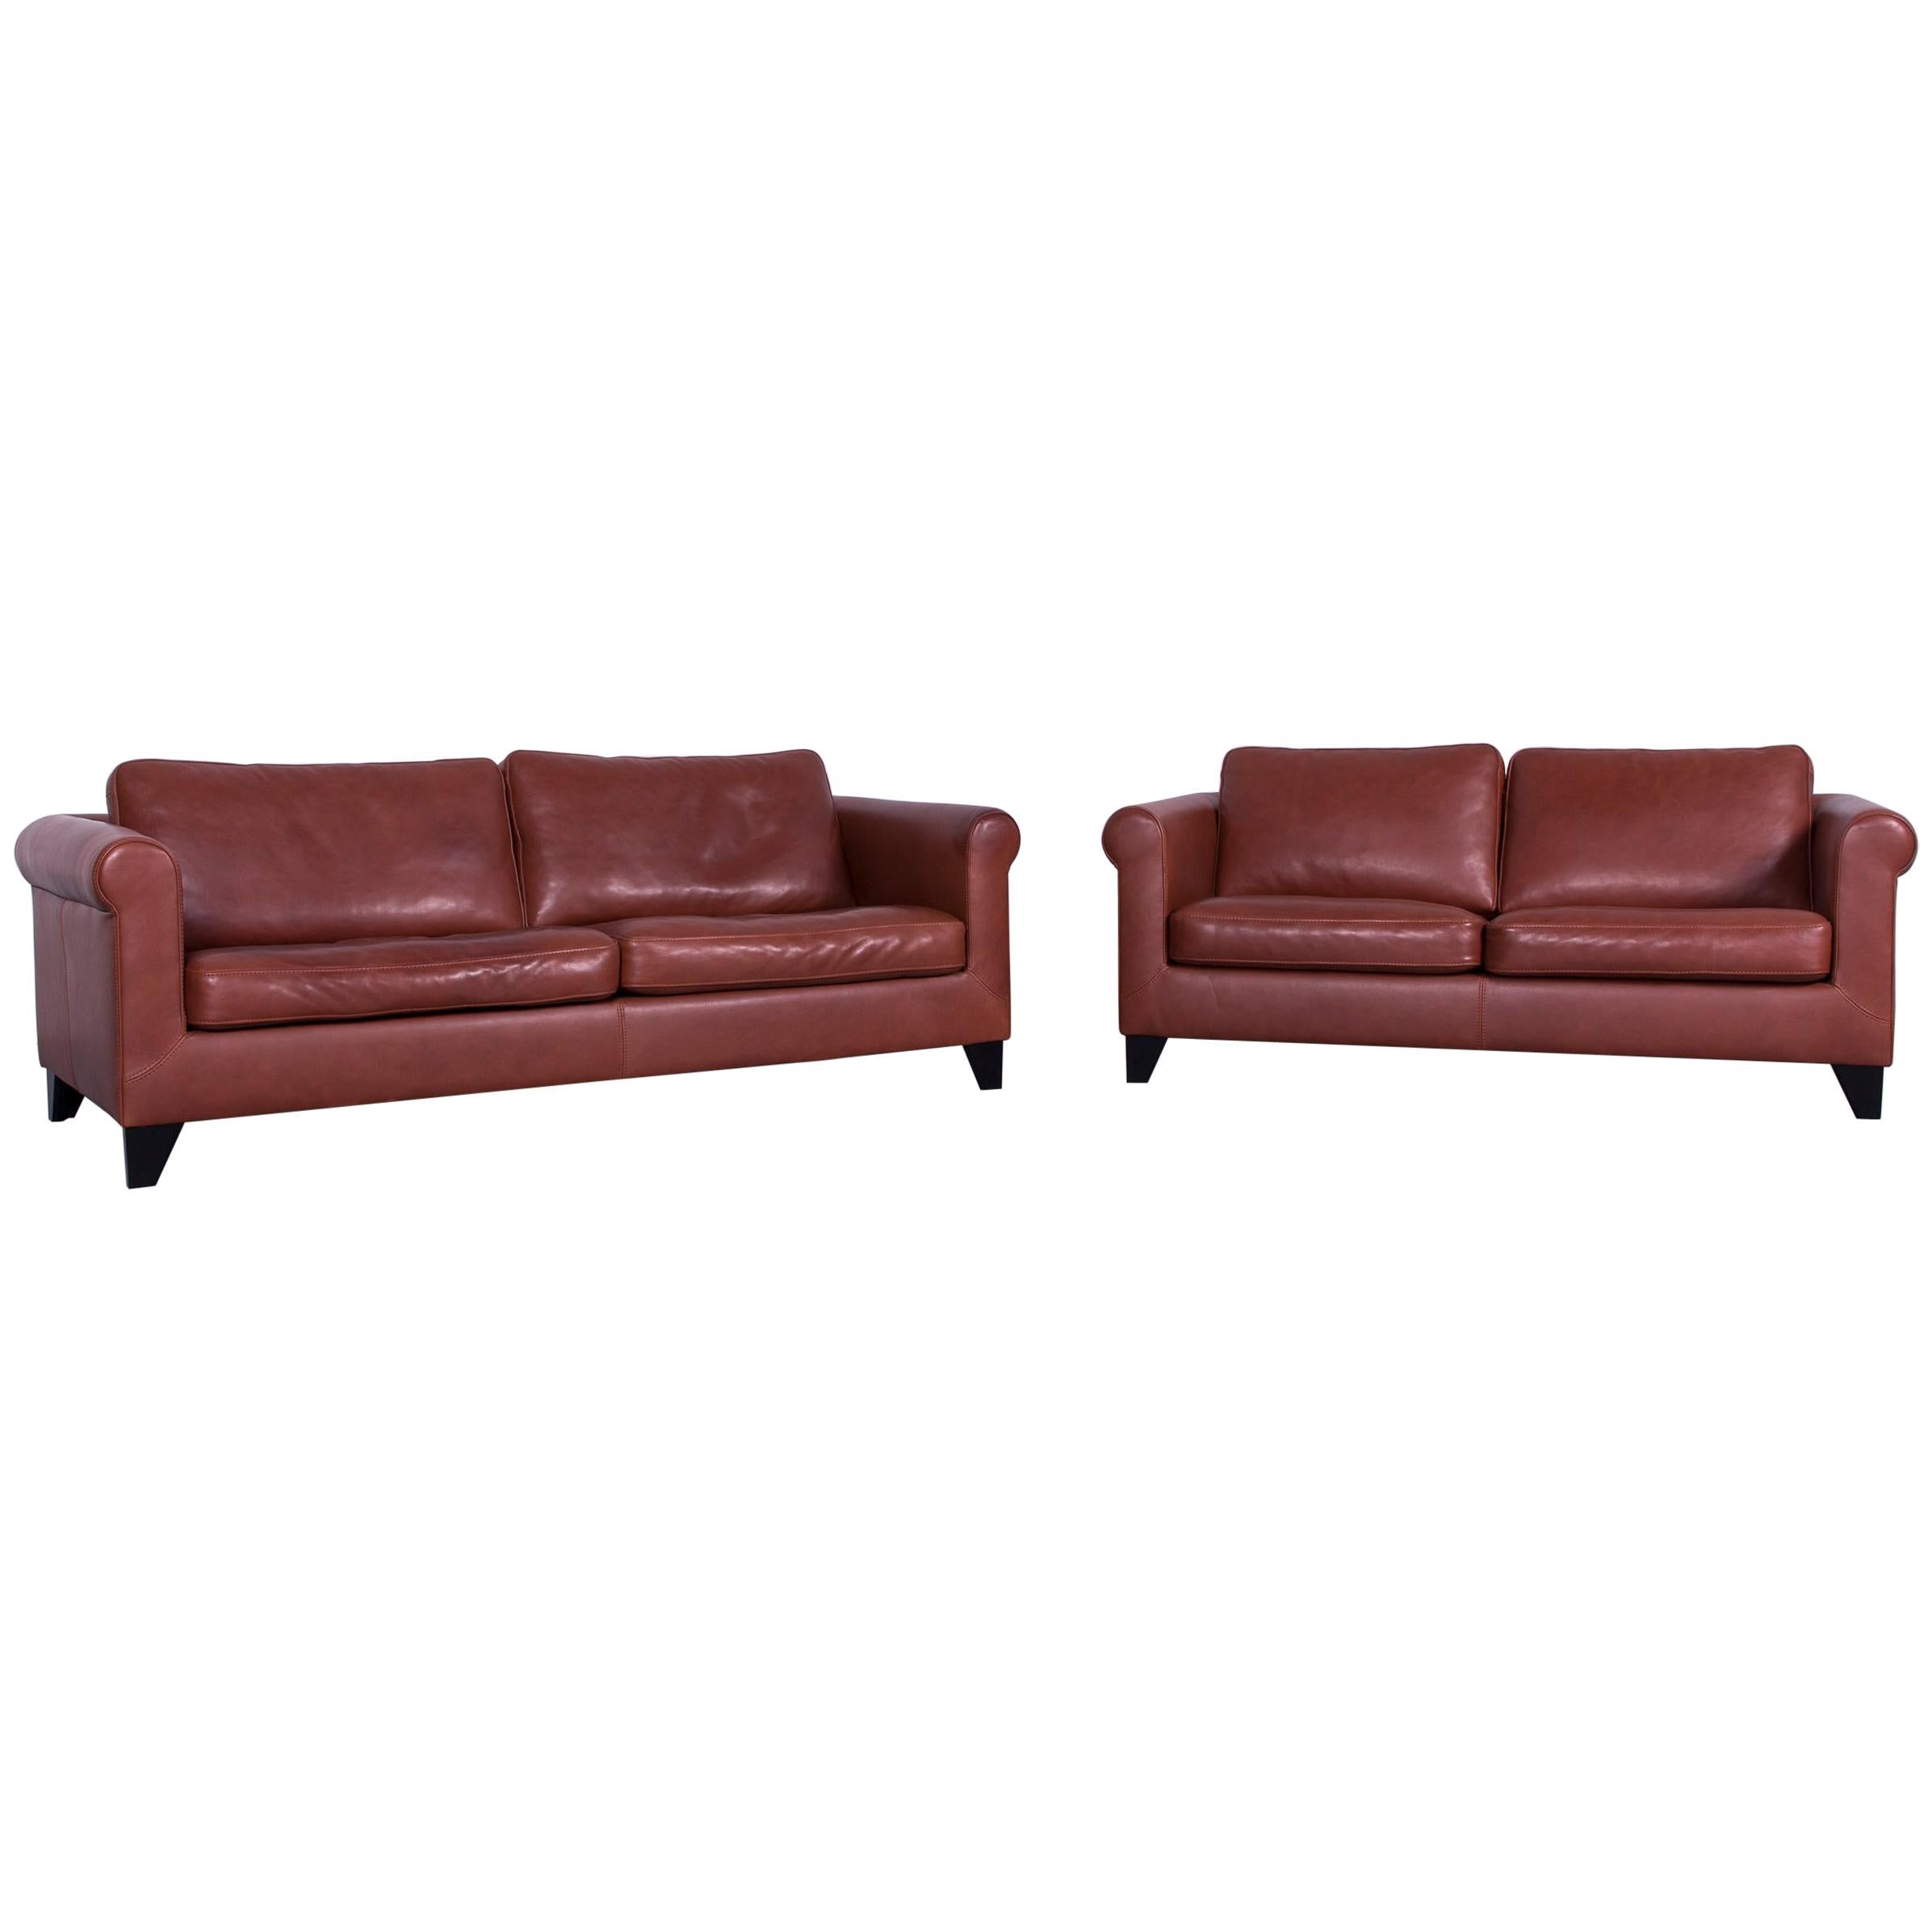 Machalke Designer Leather Sofa Red Two-Seat Couch Set